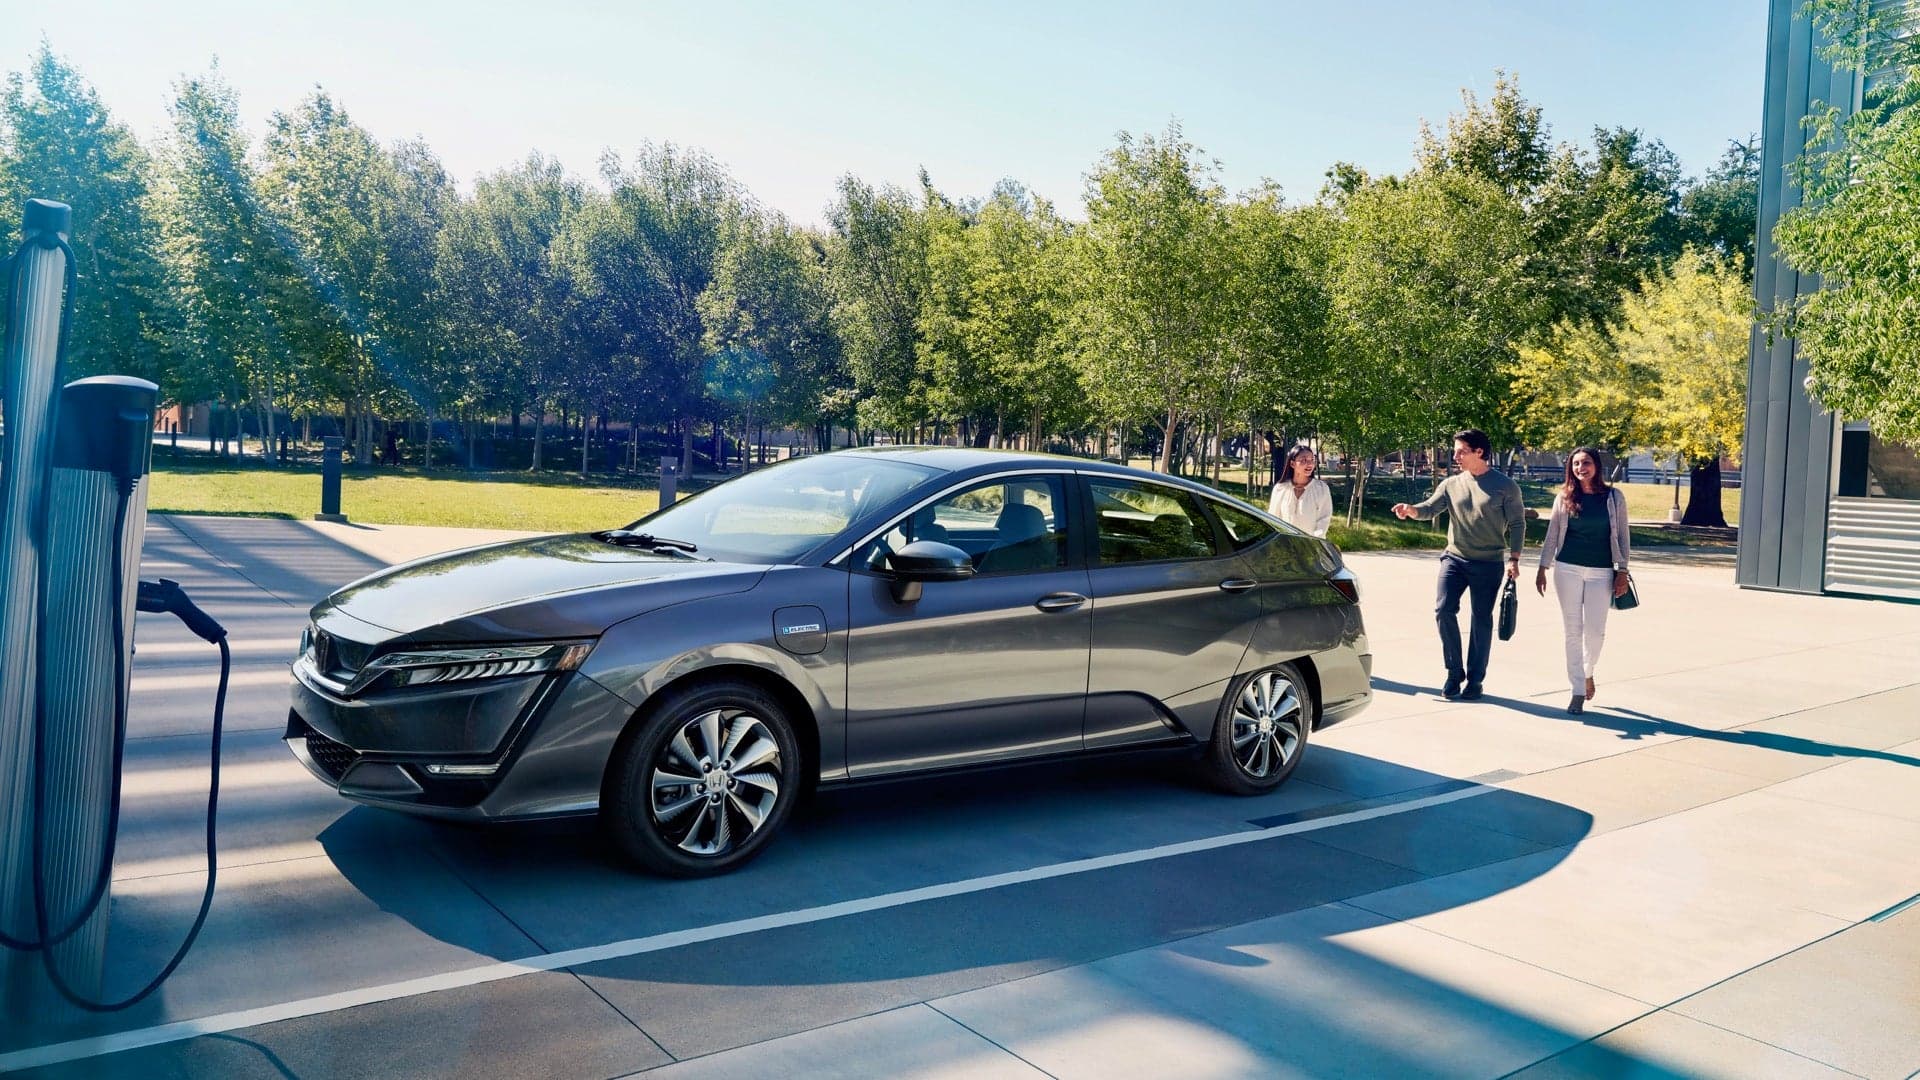 Honda Announces Partnership With China’s Largest Supplier of EV Batteries